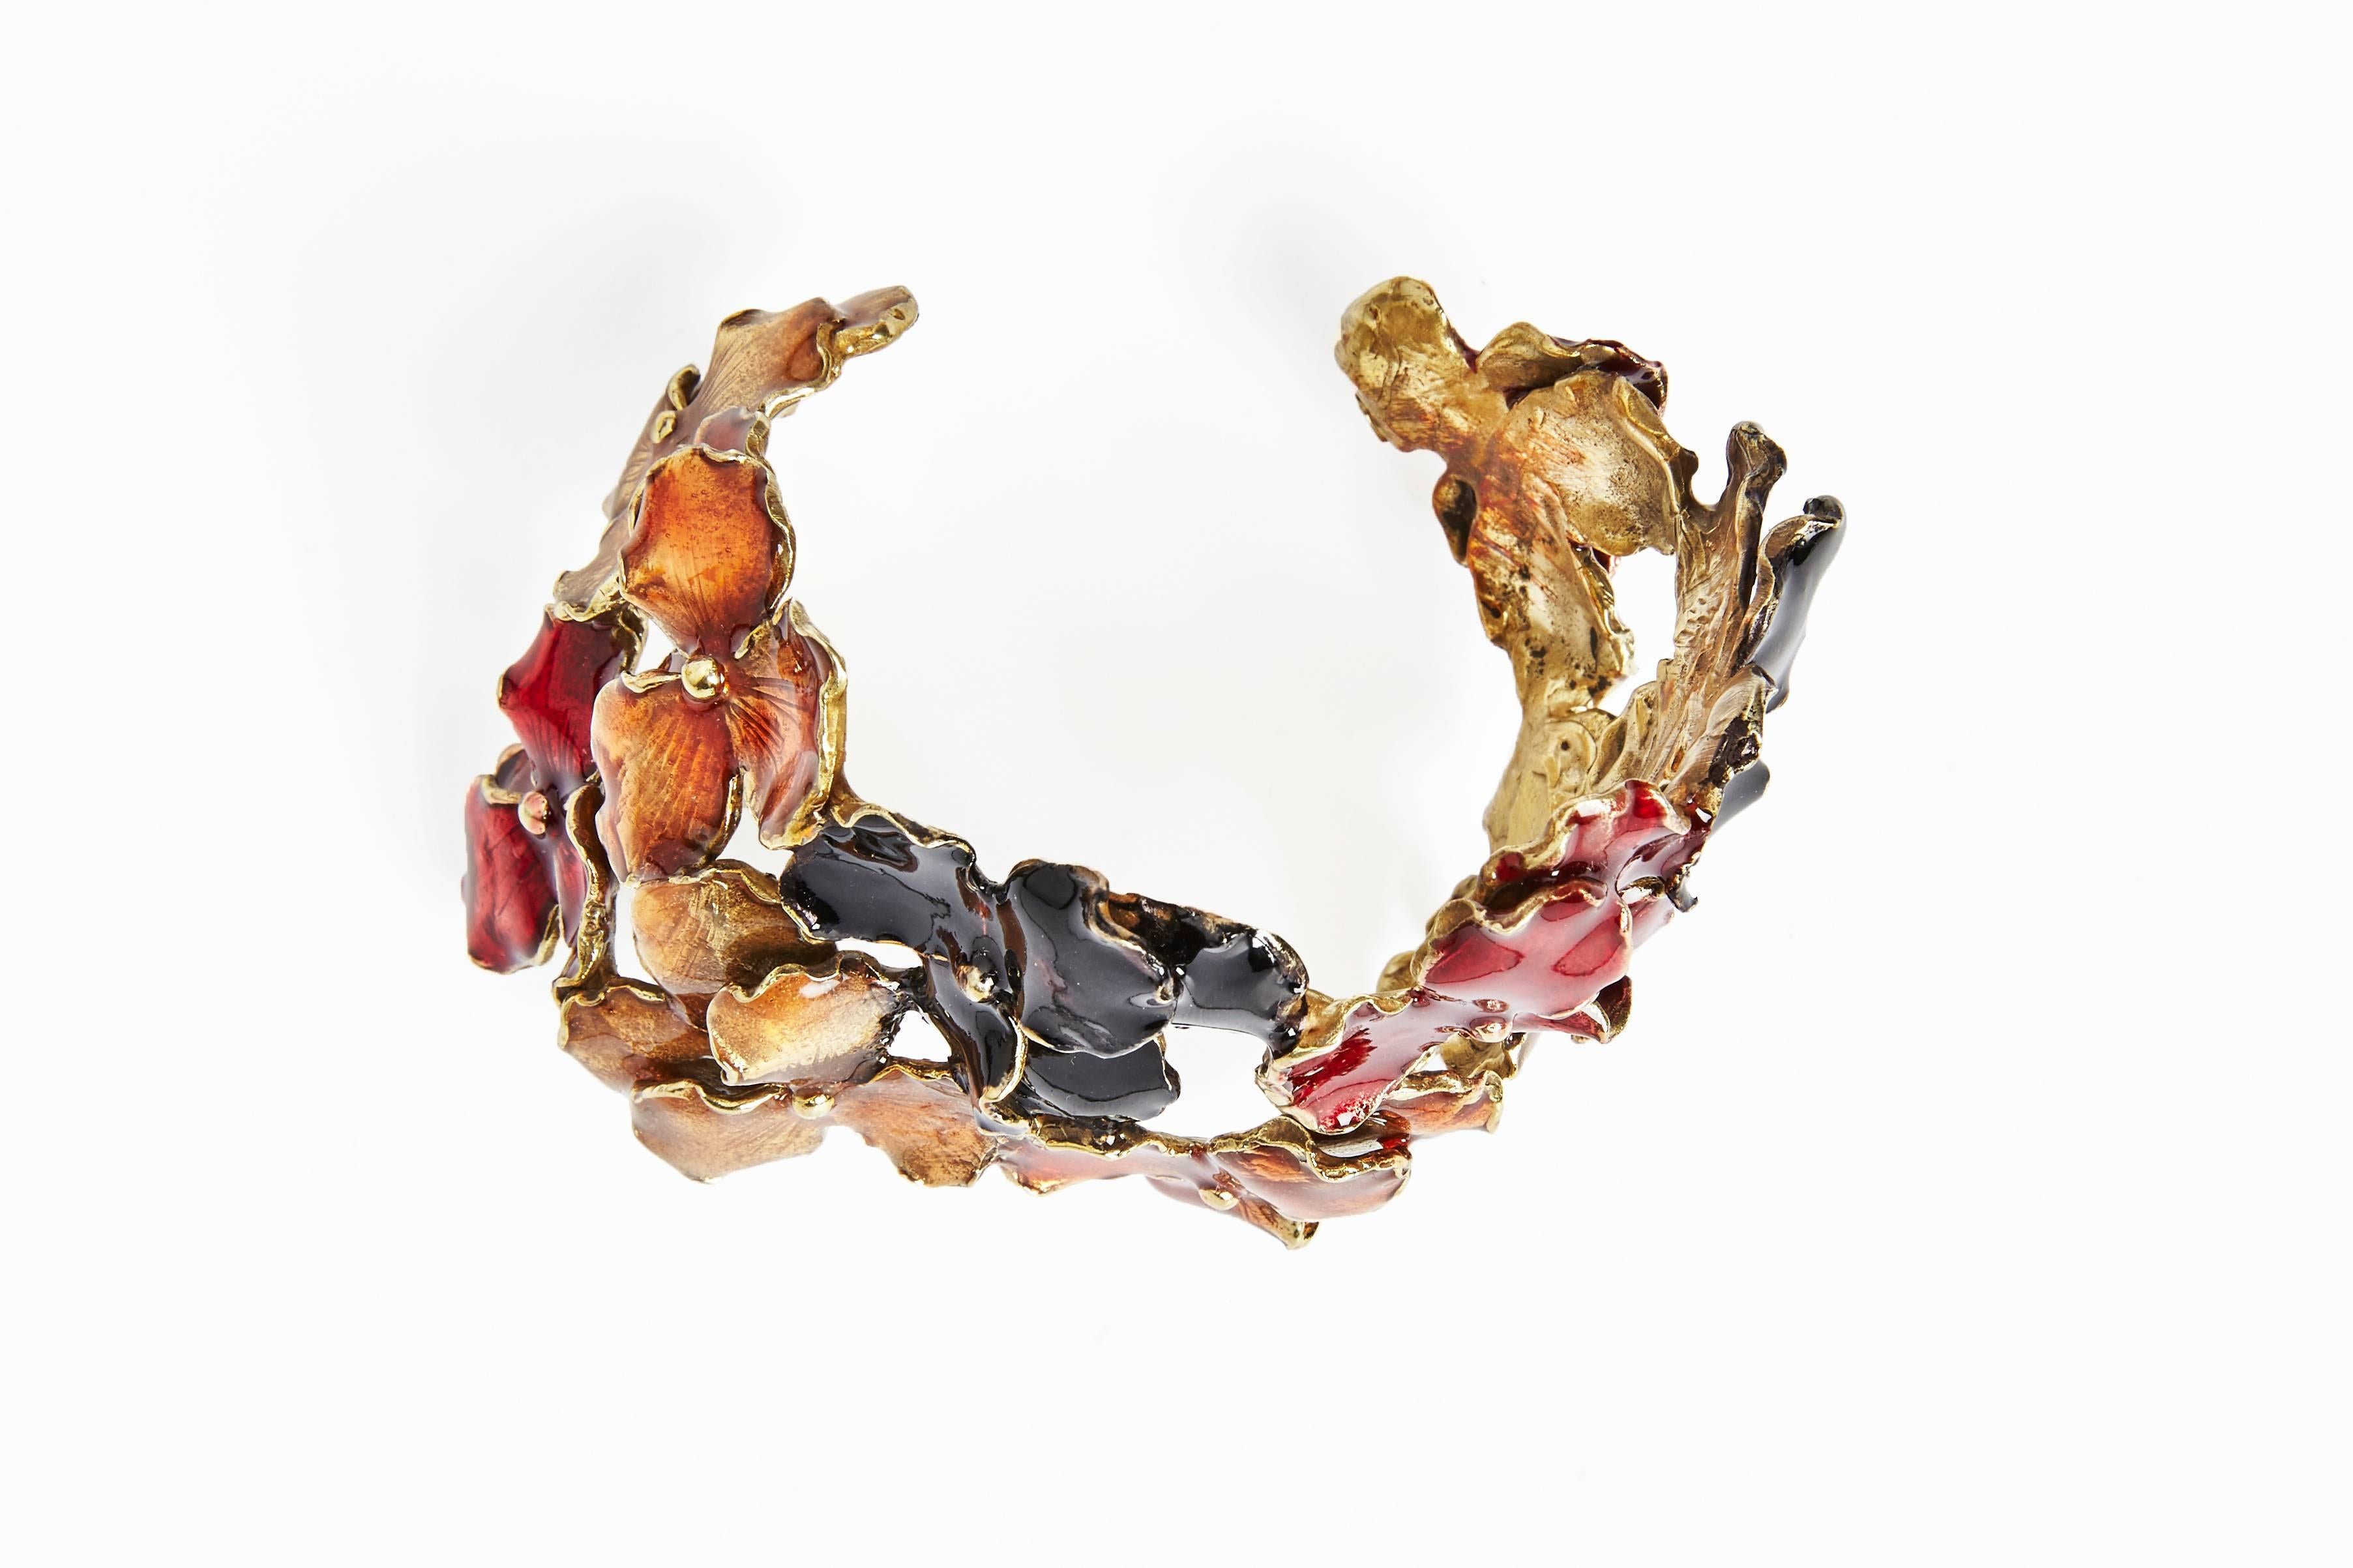 The enameled Panze bracelet by Osanna and Madina Visconti. The beautiful cuff is made from brass and multicoloured enamel. Handcrafted in Italy by Osanna and Madina Visconti di Modrone.

The cuff is adjustable to fit the wrist.